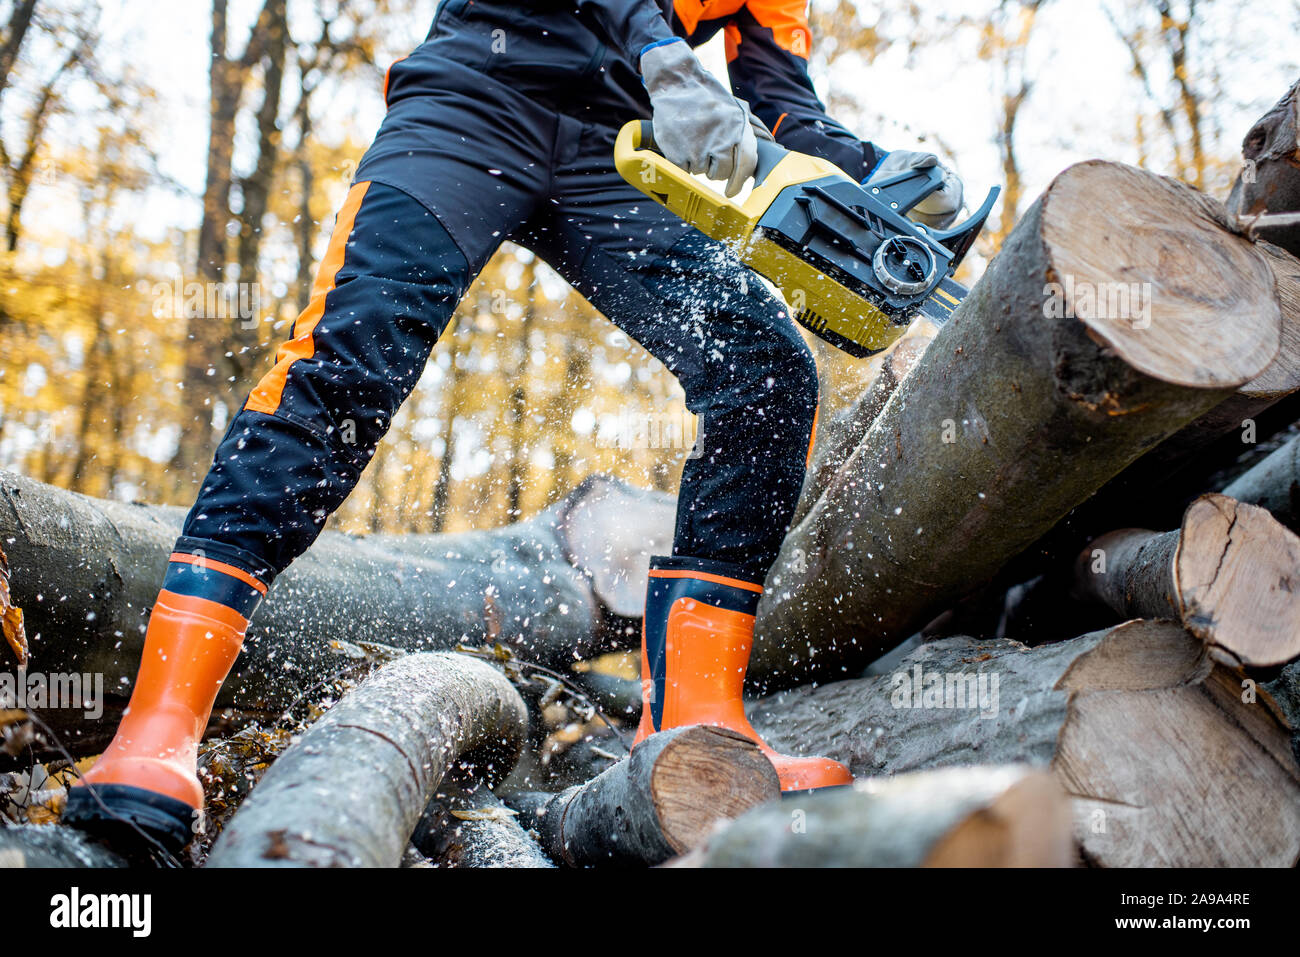 Professional lumberjack in protective workwear working with a chainsaw in the forest, sawing wooden logs, close-up view with no face Stock Photo